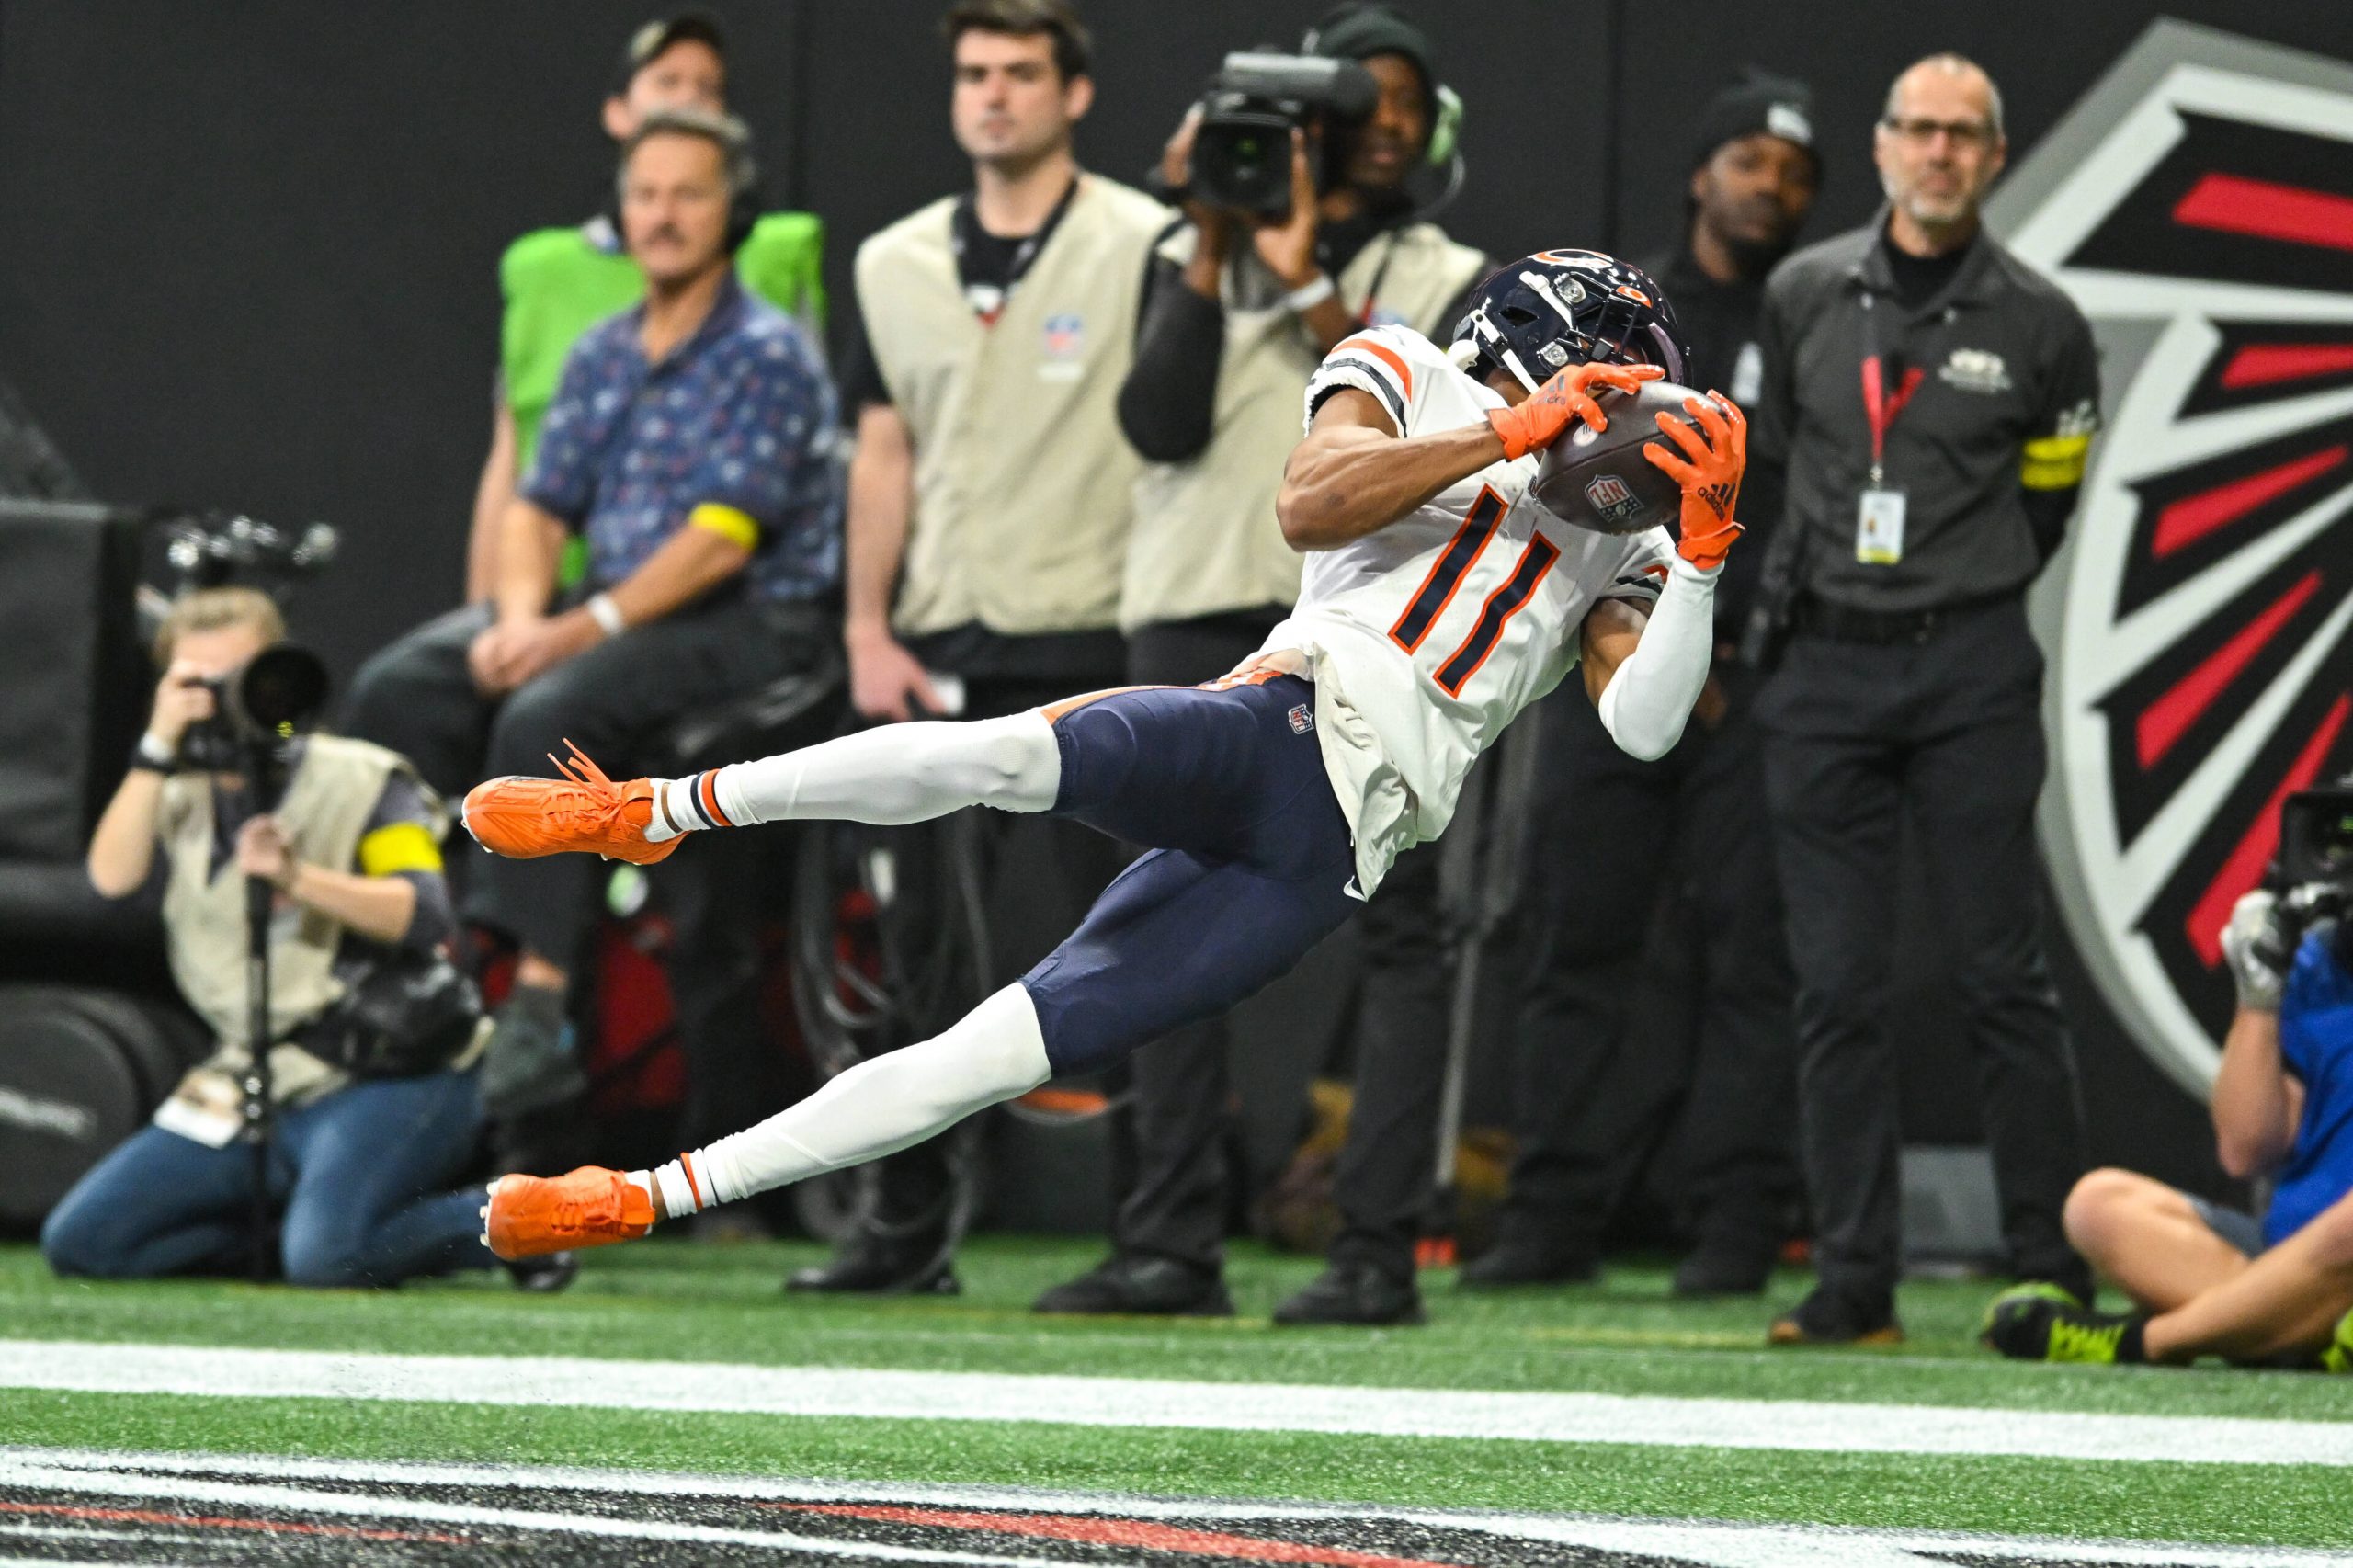 ATLANTA, GA NOVEMBER 20: Chicago wide receiver Darnell Mooney 11 catches a touchdown pass during the NFL, American Football Herren, USA game between the Chicago Bears and the Atlanta Falcons on November 20th, 2022 at Mercedes-Benz Stadium in Atlanta, GA. Photo by Rich von Biberstein/Icon Sportswire NFL: NOV 20 Bears at Falcons Icon221120005